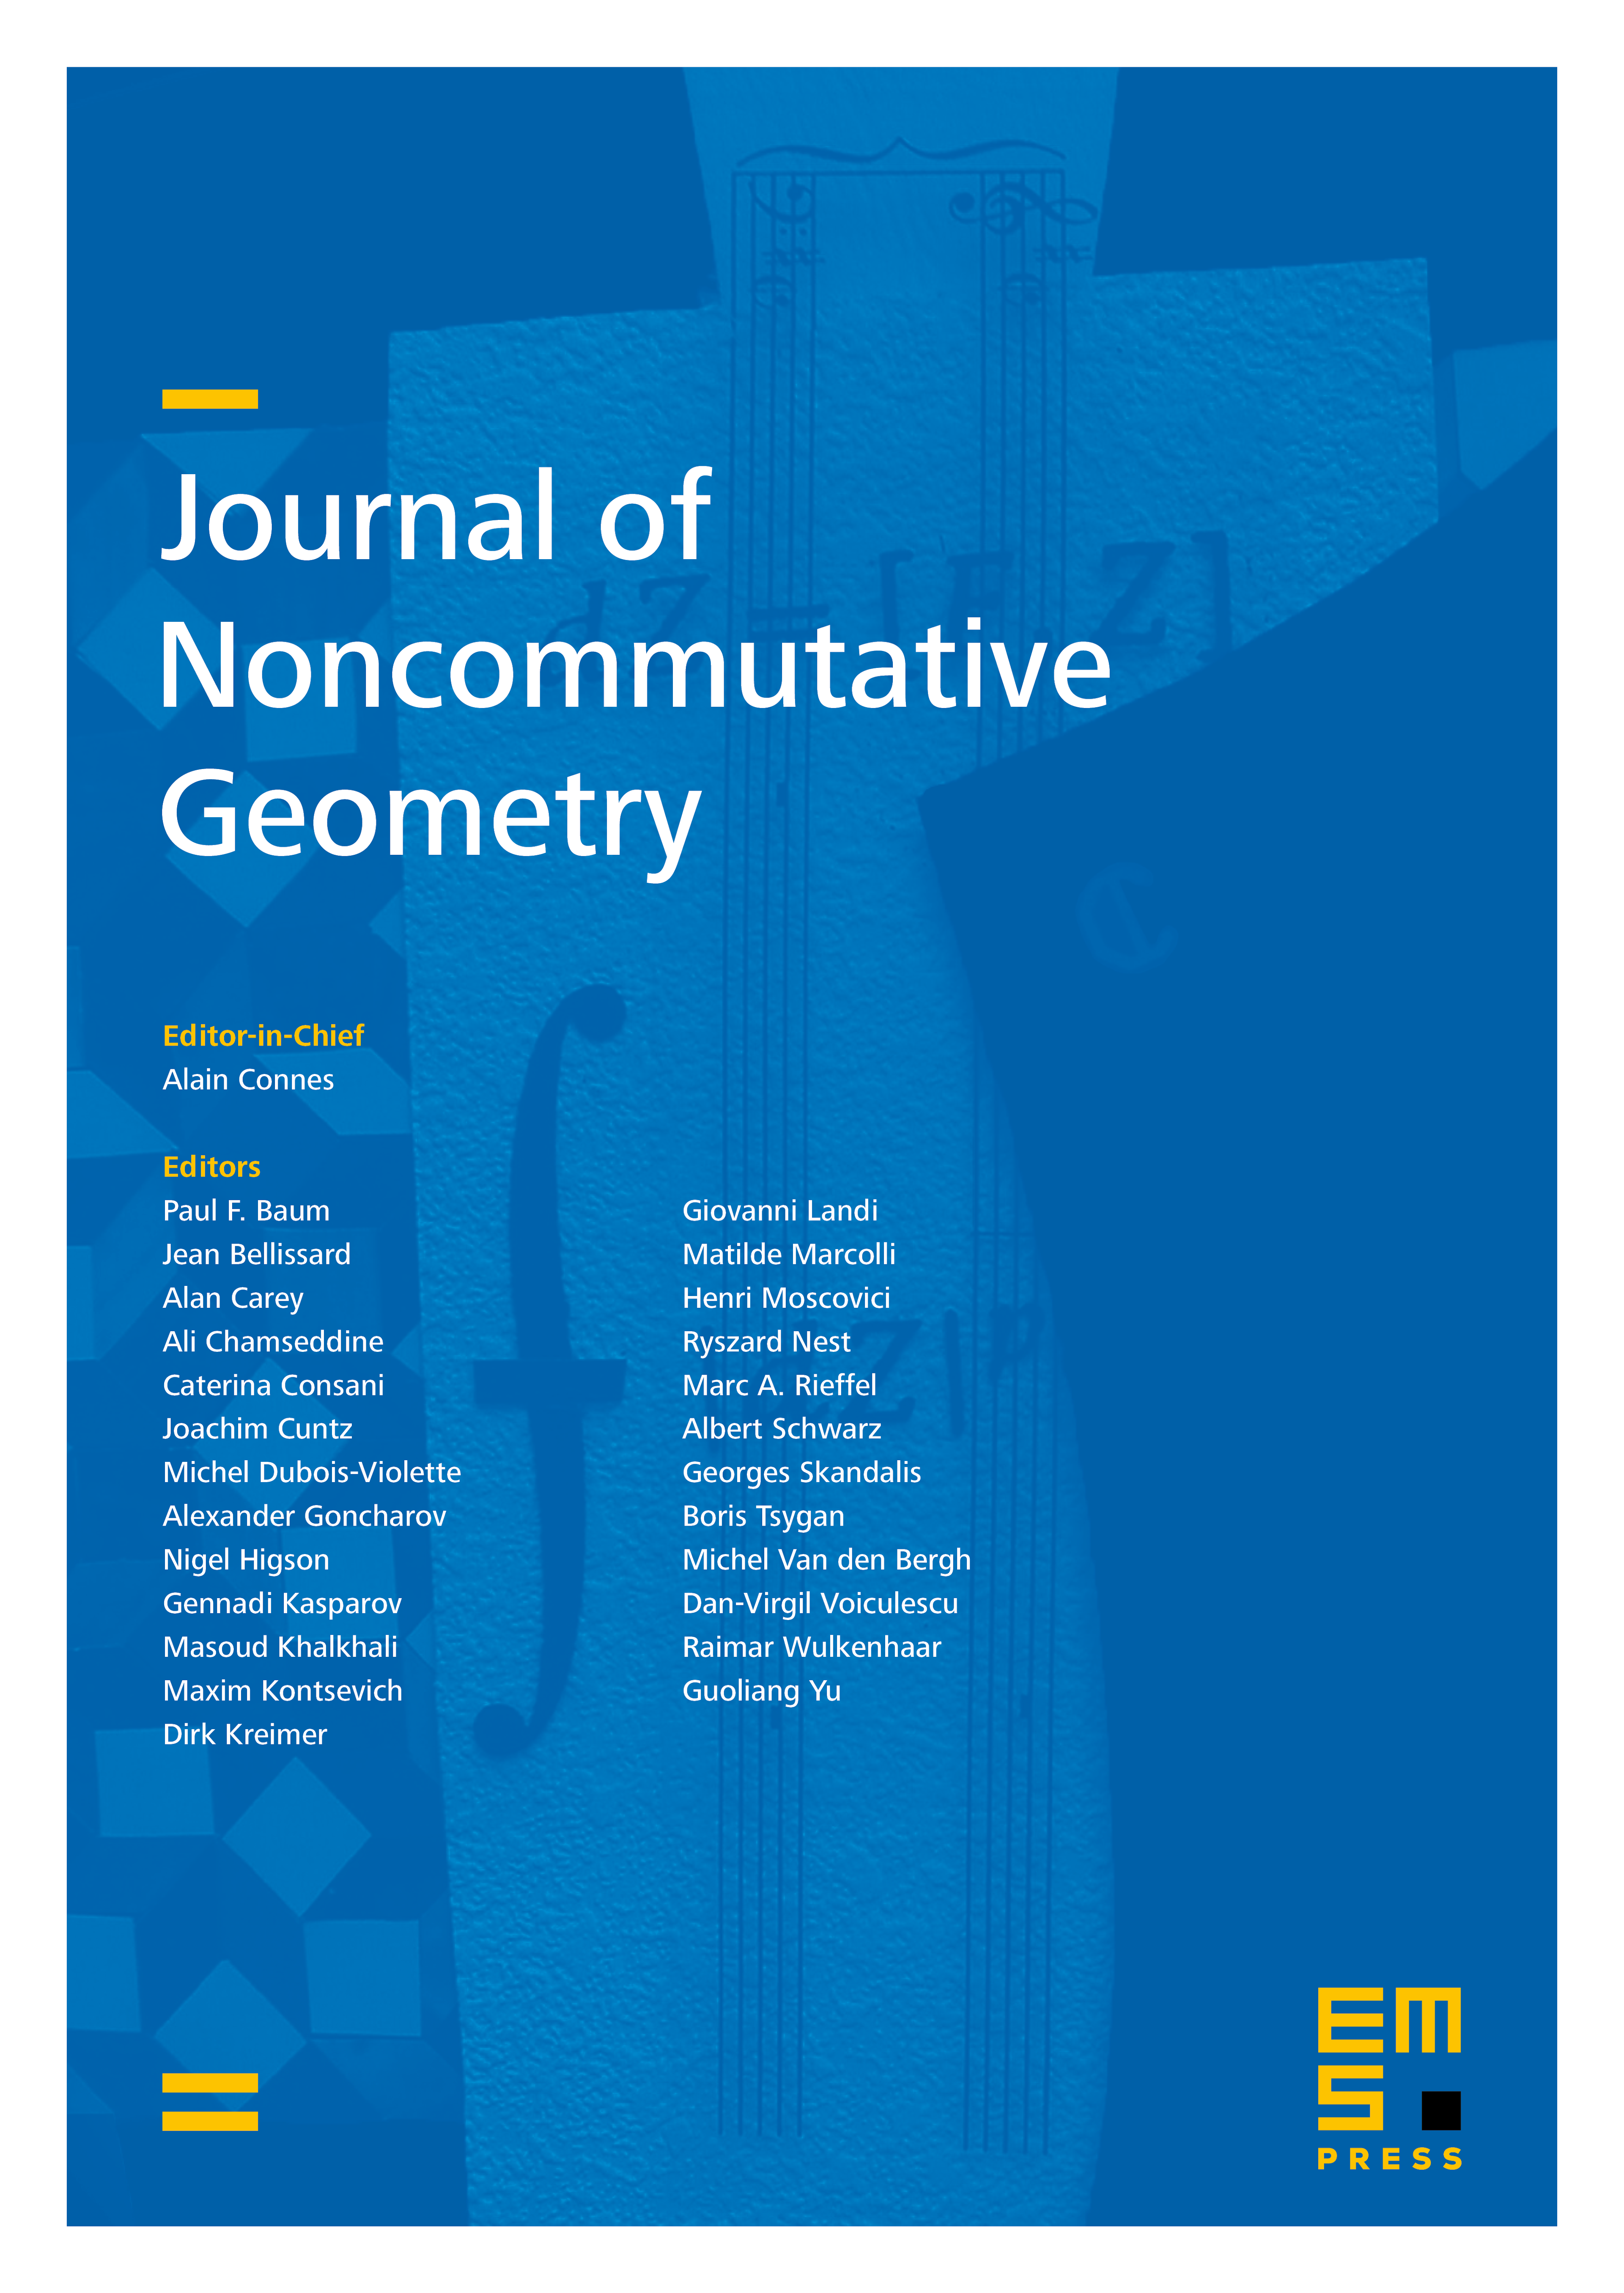 The dual modular Gromov–Hausdorff propinquity and completeness cover